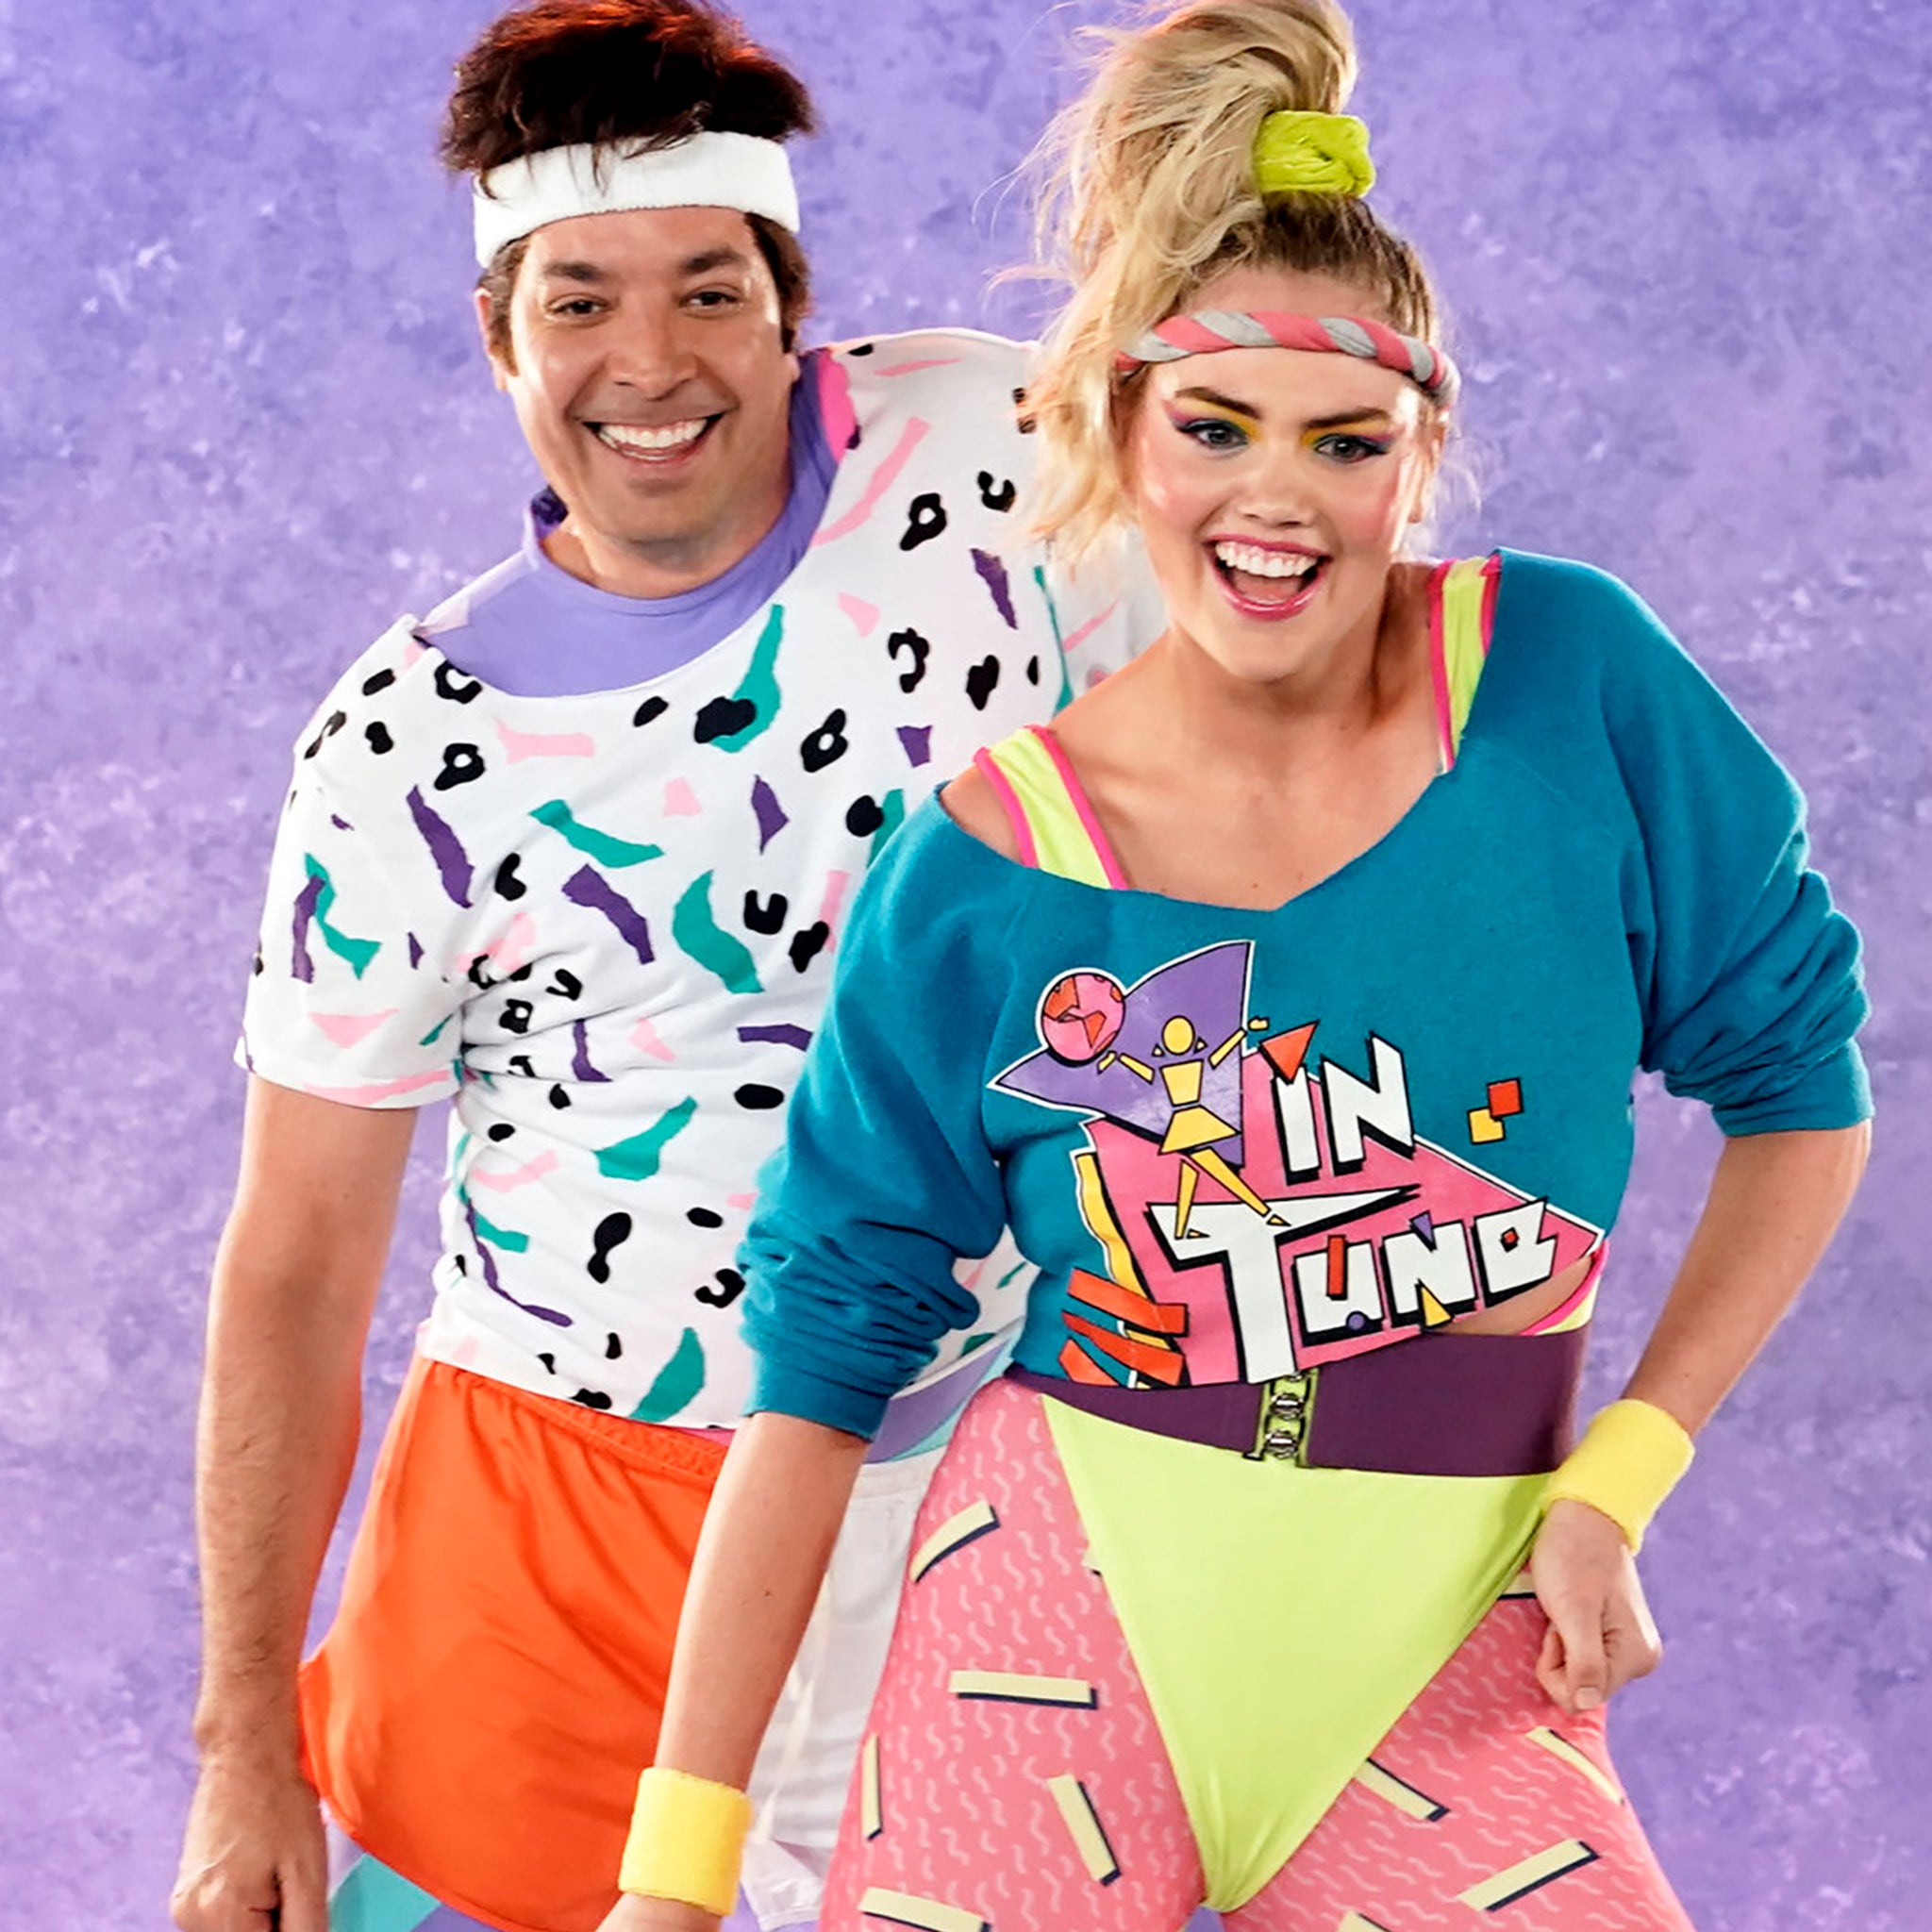 Kate Upton and Jimmy Fallon Take on '80s Exercise Challenge